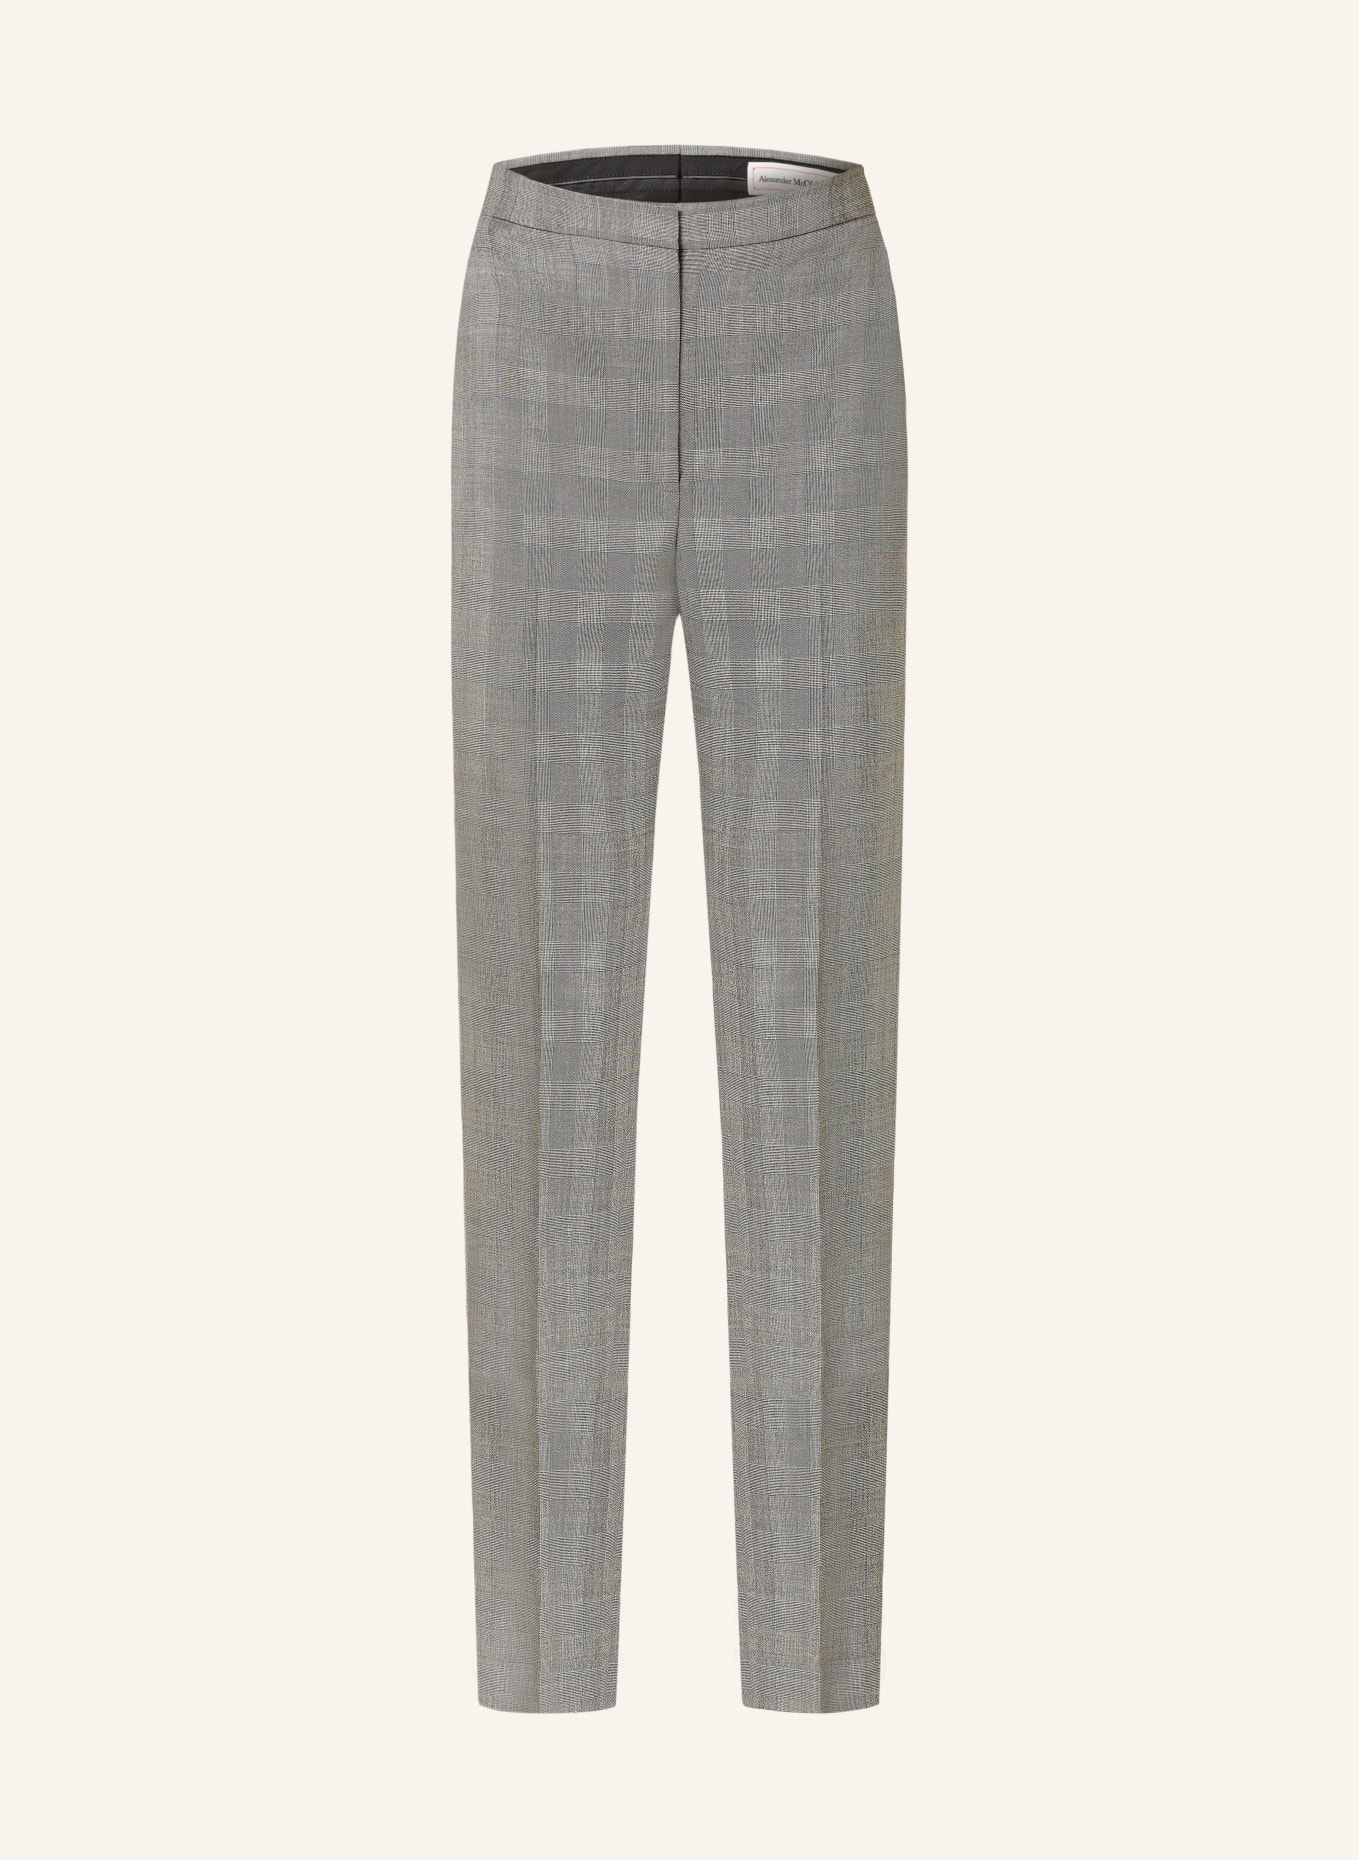 Alexander McQUEEN Trousers, Color: GRAY (Image 1)